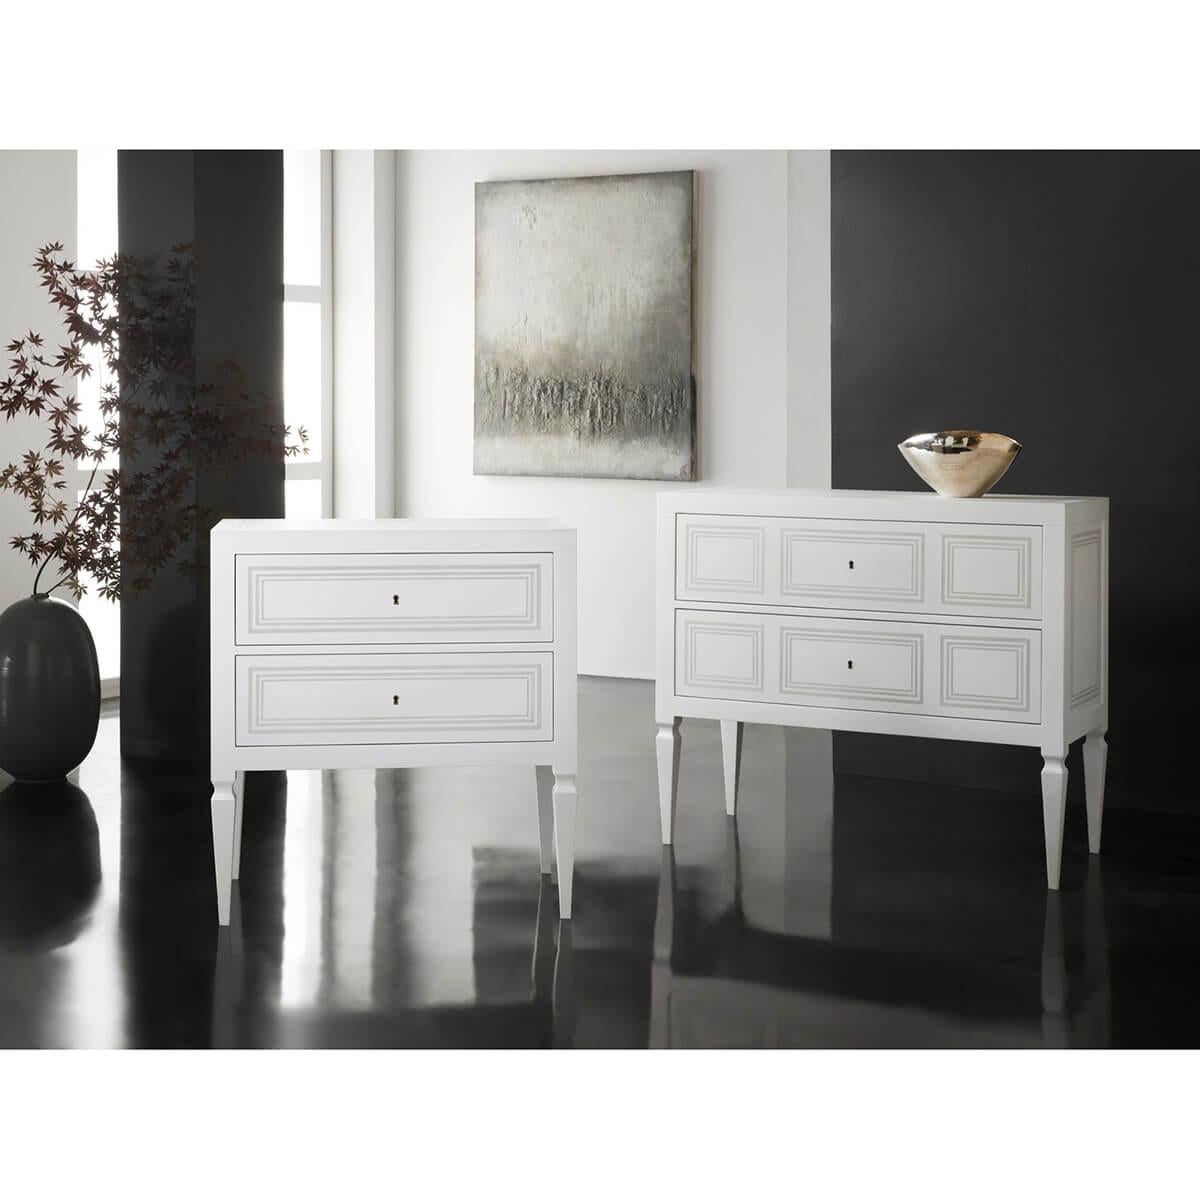 Linen color painted and textured, this bedside chest boasts beautiful gray painted geometric designs on the drawers and side panels that add a touch of timeless elegance.

With working locks on the two drawers and raised on square tapered legs, this